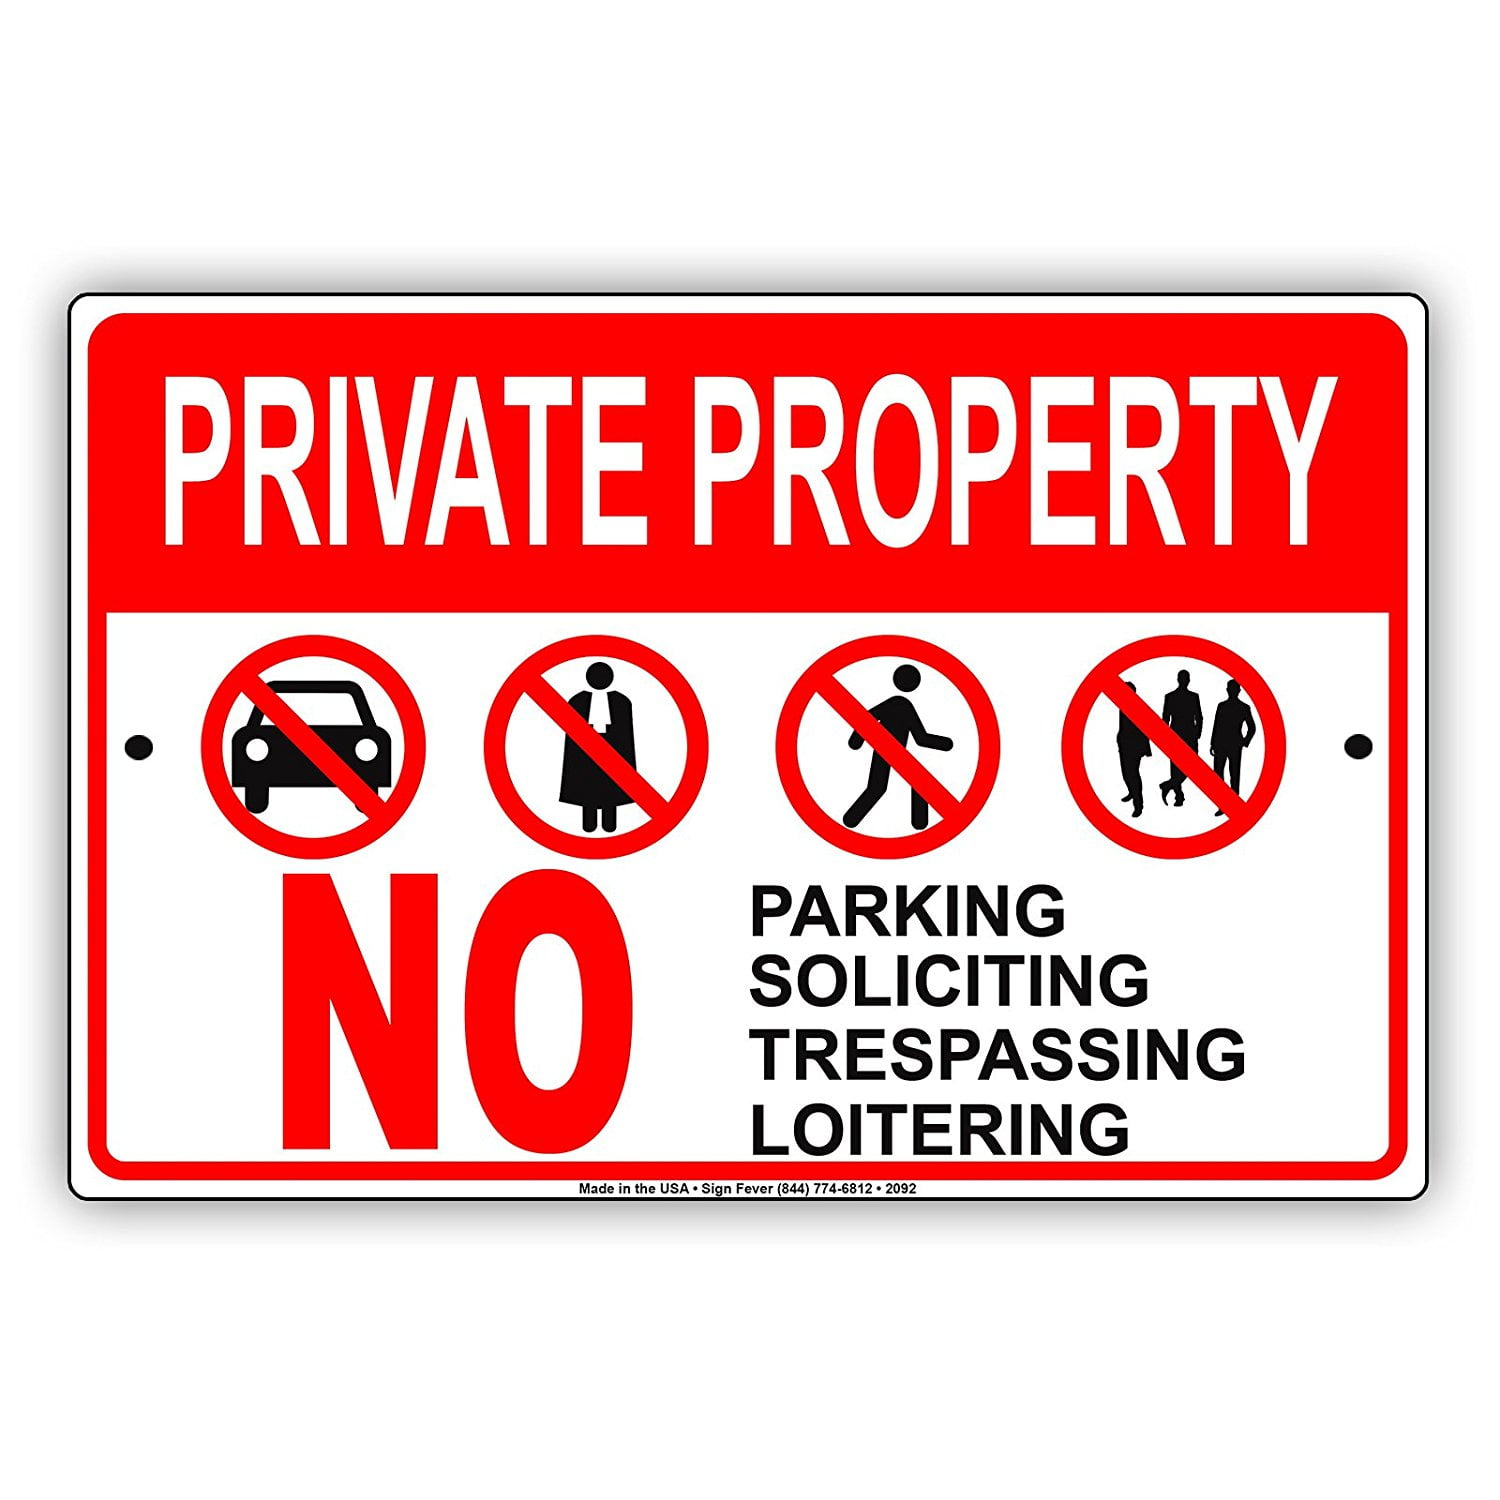 Made In USA Free Body Piercing For Trespassers 8"x12" Metal Plate Parking Sign 